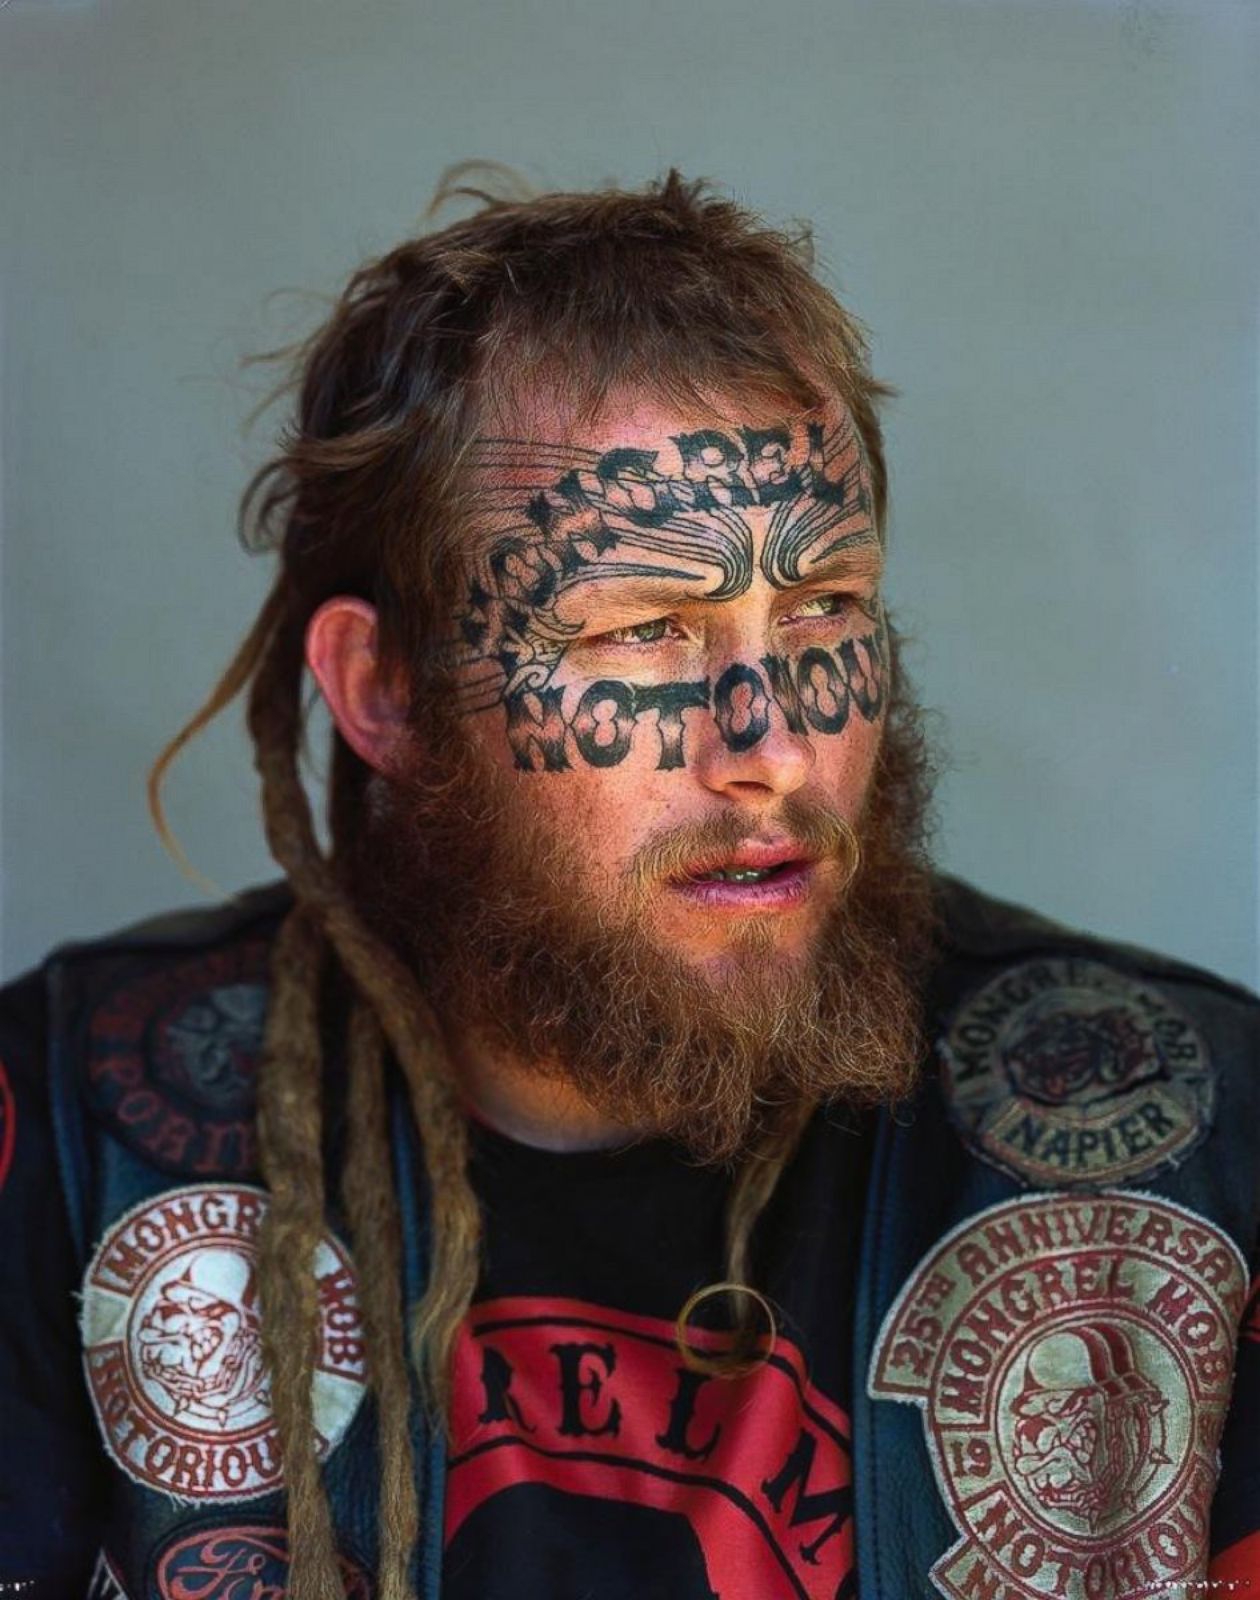 Stunning portraits of members of the mighty mongrel mob photos